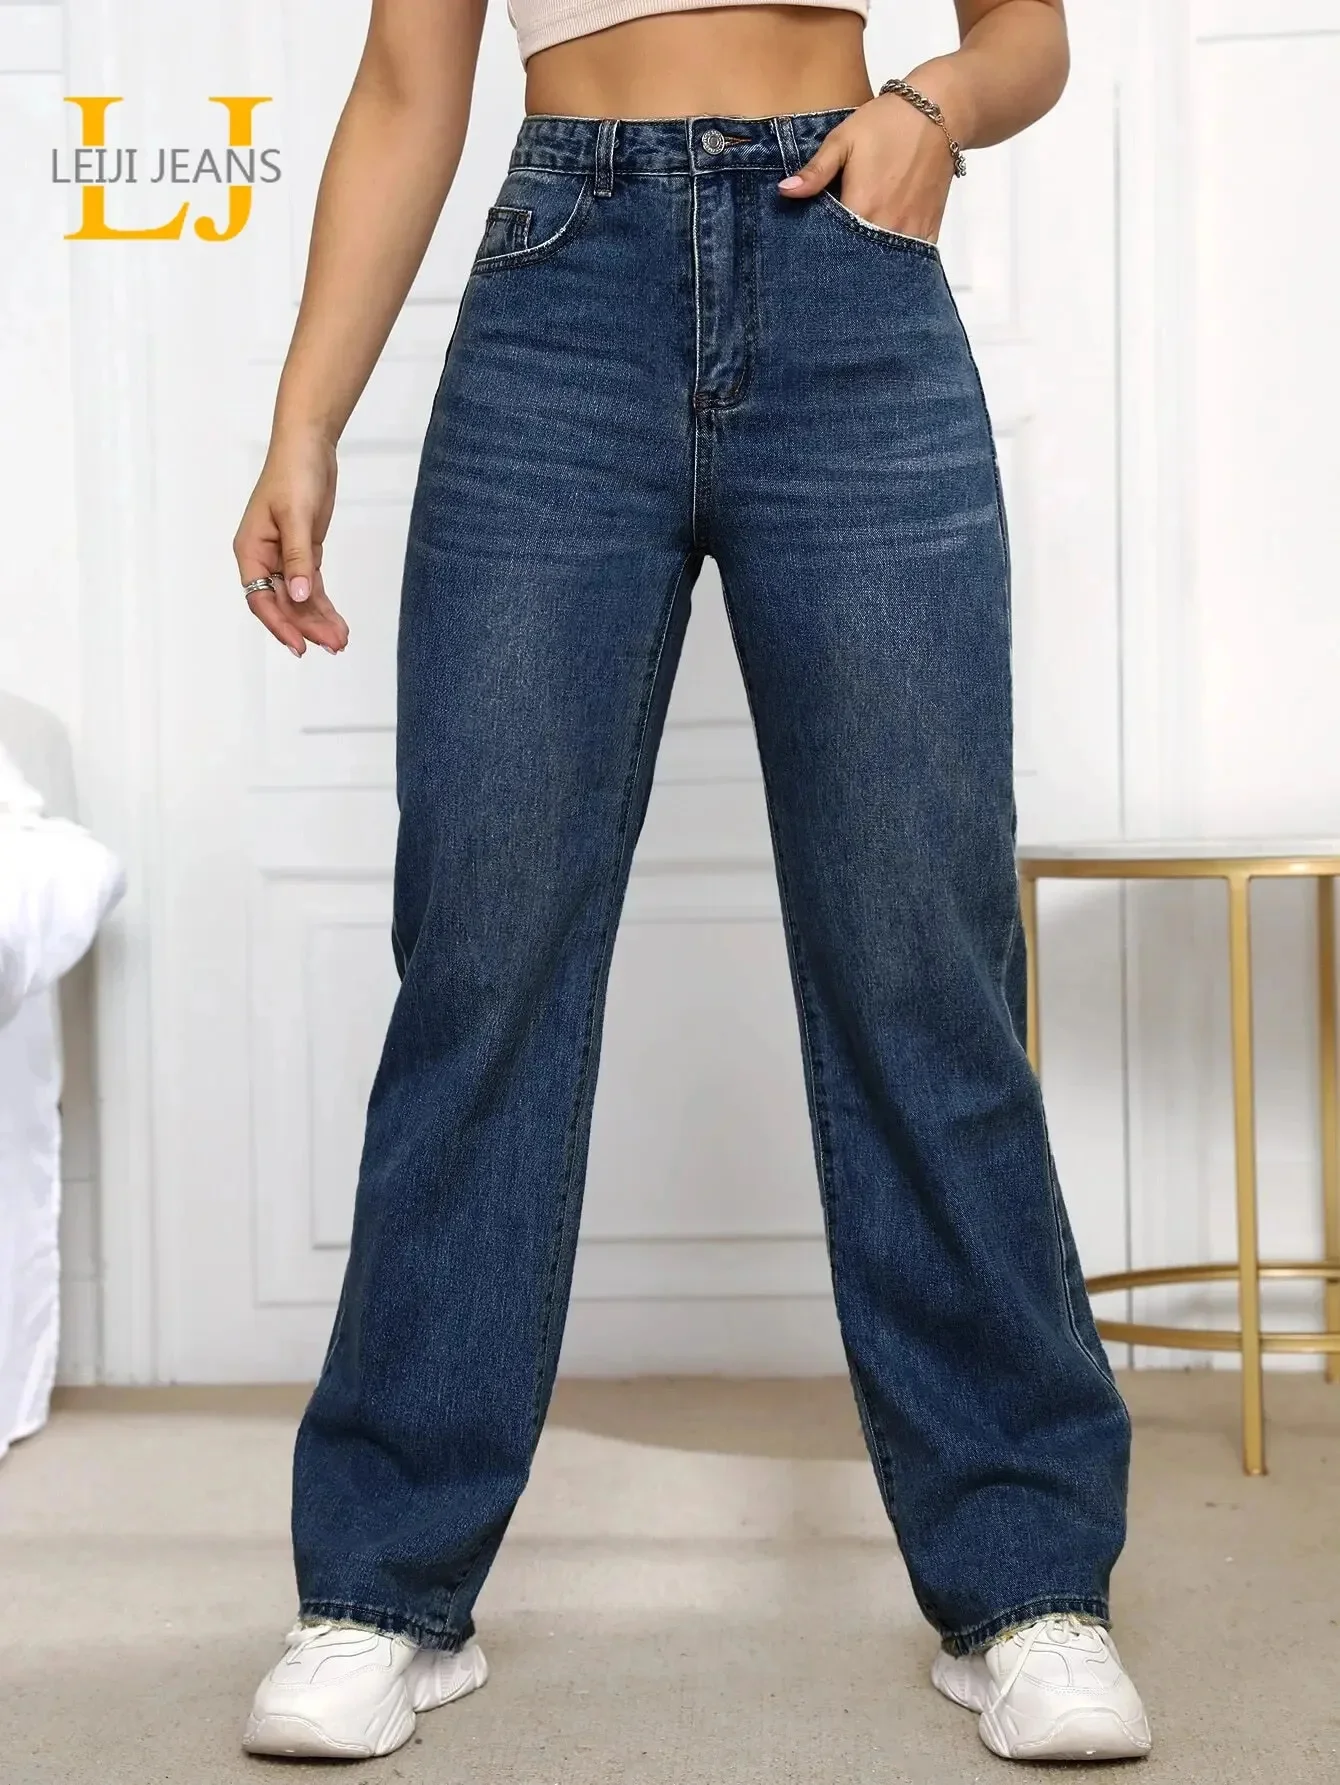 

plus size wide leg jeans for women high waist stretchy loose women denim jeans full length curvy jeans 175cms tall s pants